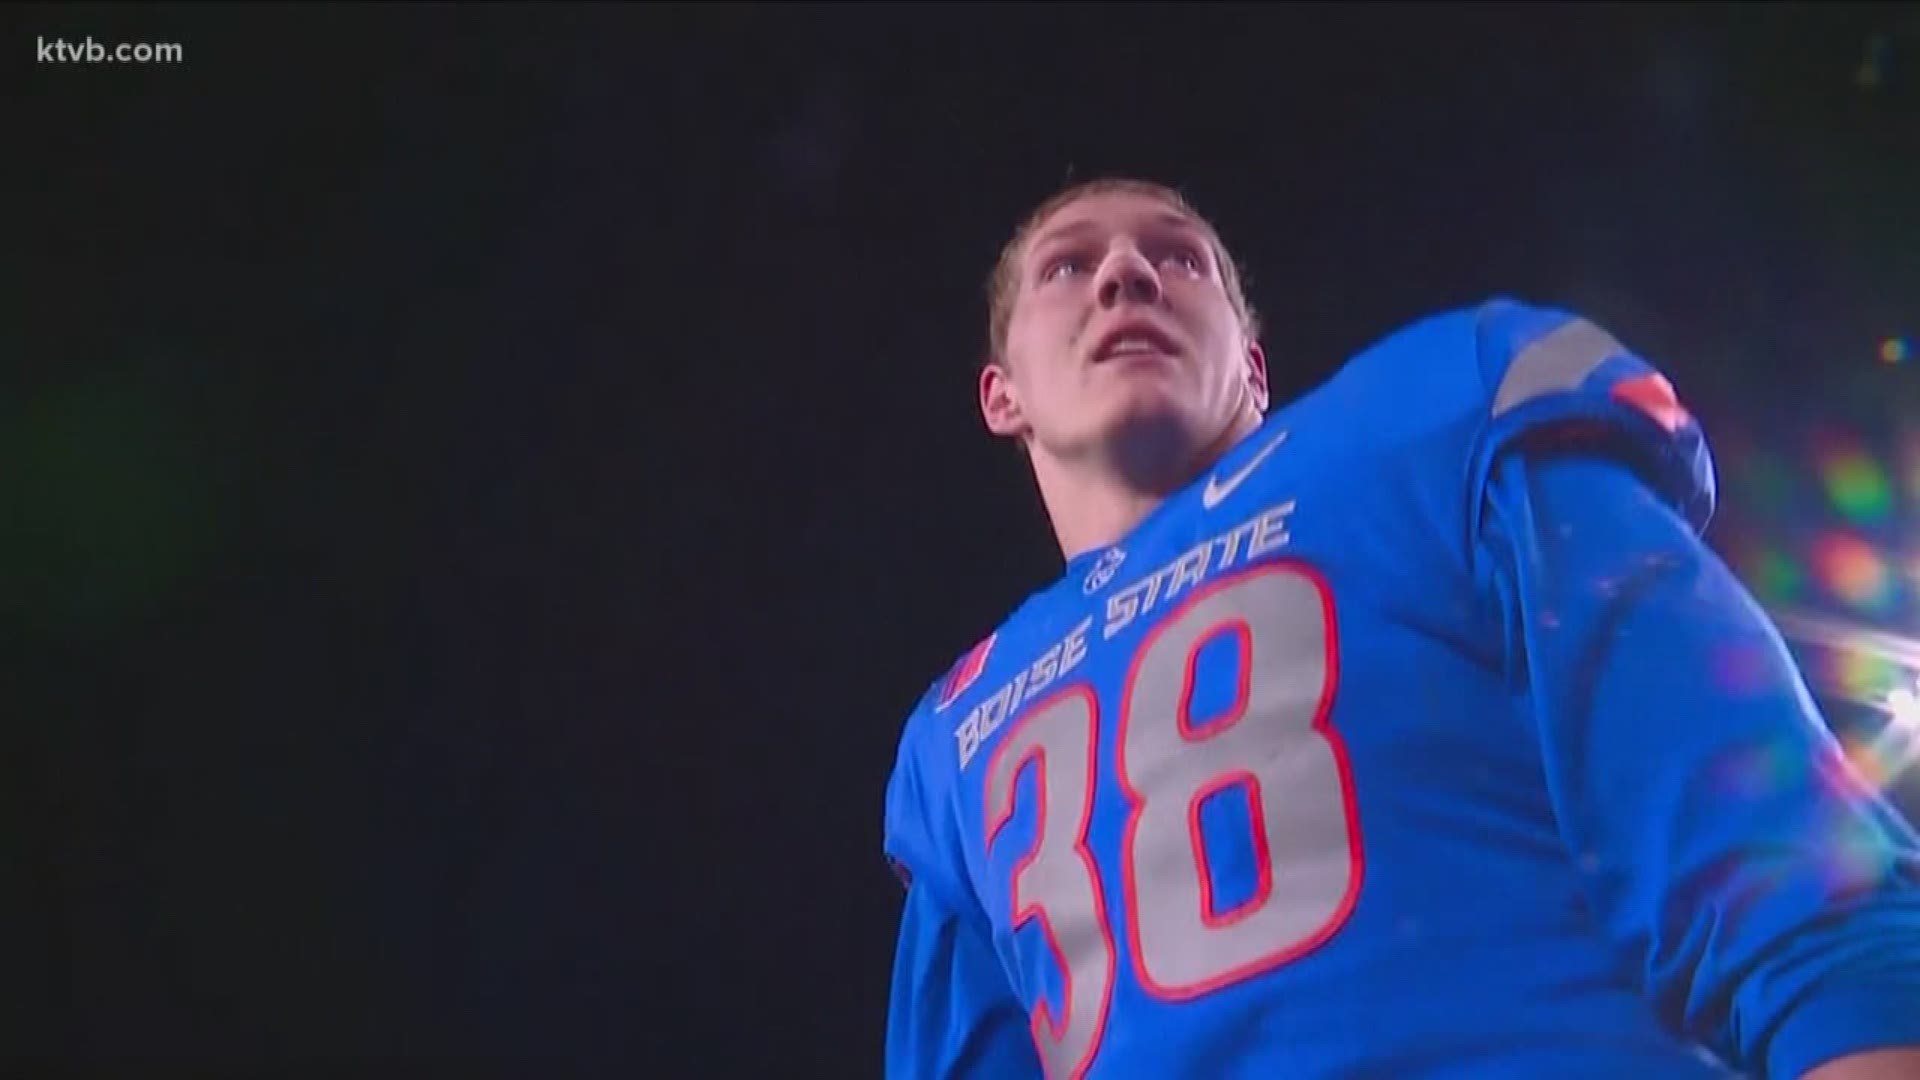 Leighton Vander Esch will be in elite company as the 2018 NFL Draft gets underway in Dallas on Thursday. The former Boise State star linebacker will be one of just 22 players in attendance at the premier selection event inside AT&T Stadium.